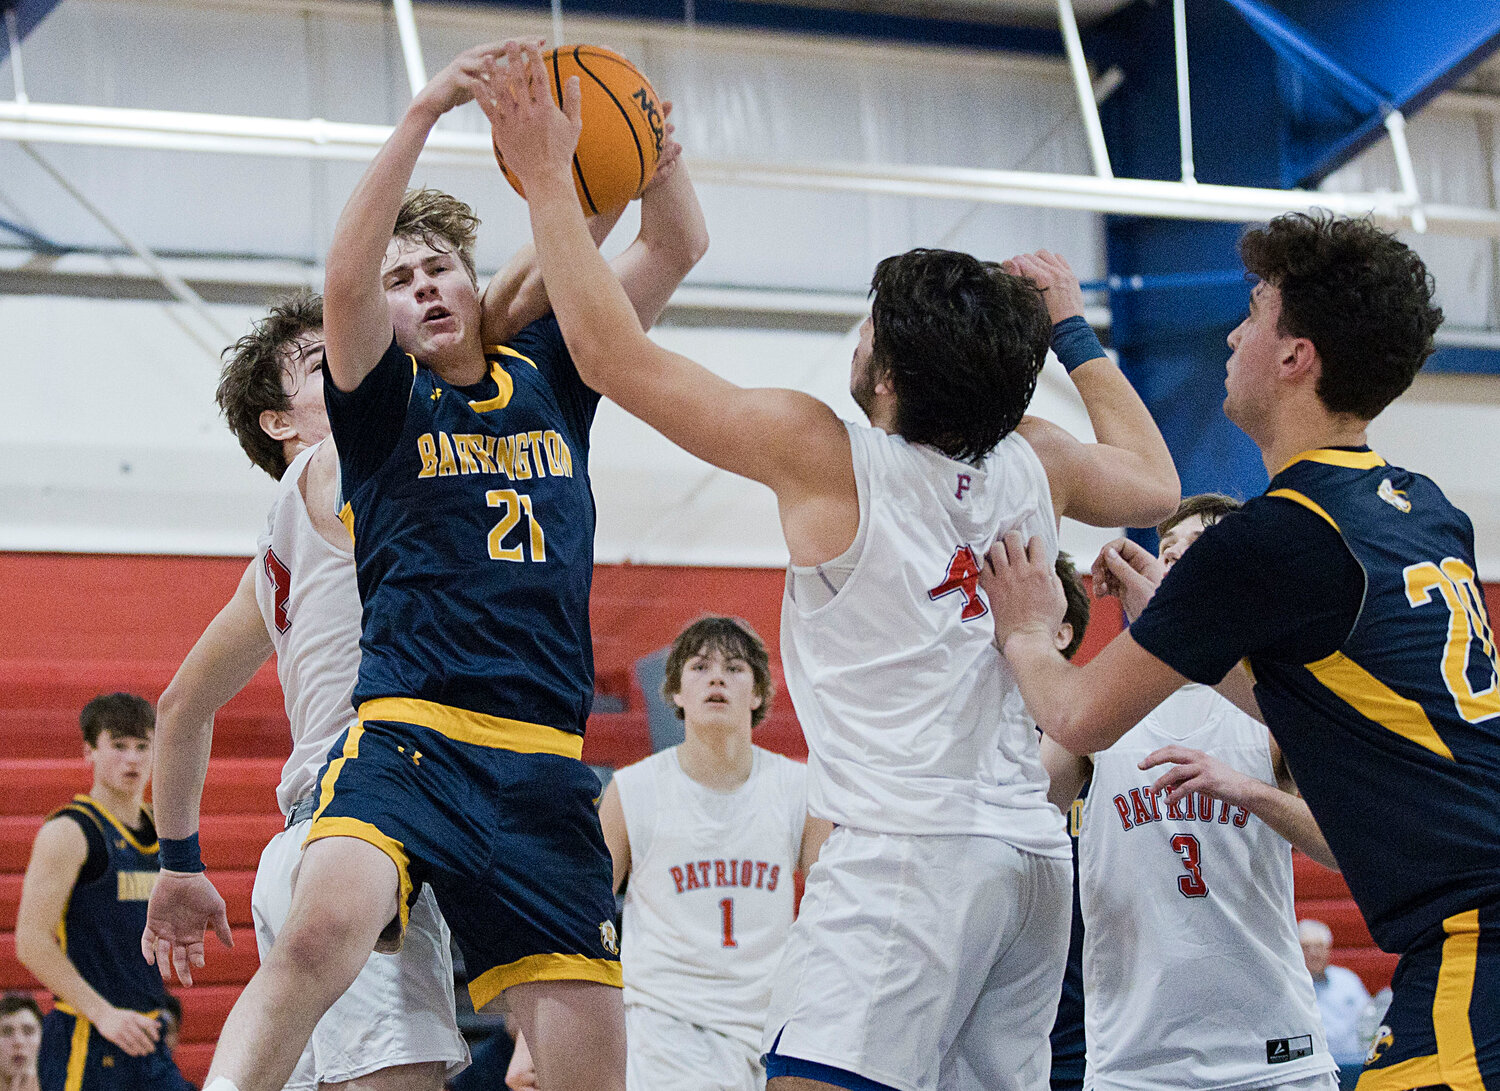 Evan Anderson pulls down a rebound during the second half of Thursday's game against Portsmouth.